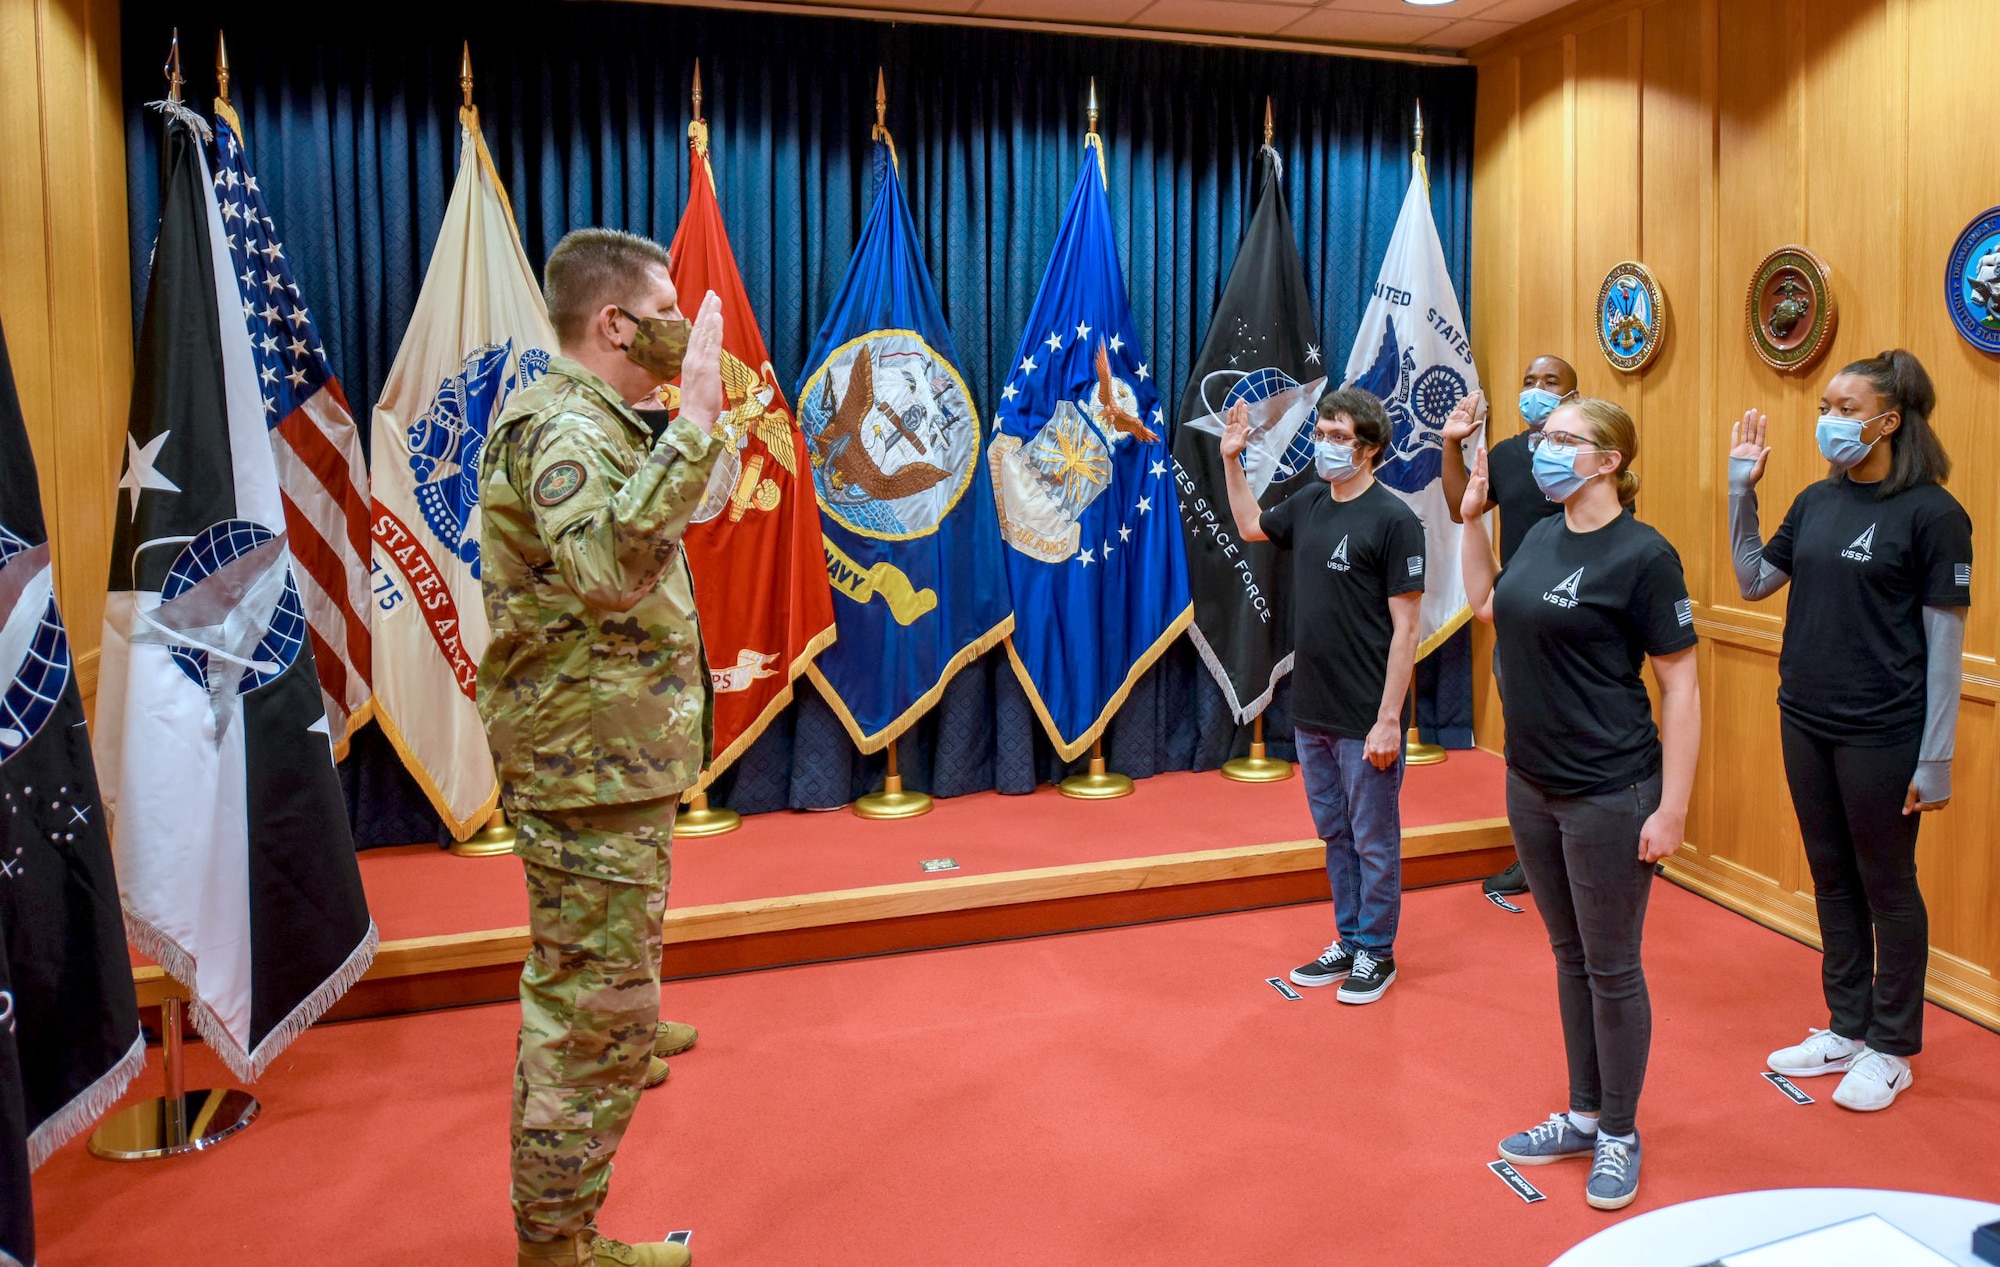 The Vice Chief of Space Operations Gen. David D. “DT” Thompson swore in the first four Space Force recruits at the Baltimore Military Entrance Processing Command station, Fort George G. Meade, MD October 20, 2020. The first four recruits will join others from Colorado, placing them on a direct path to Basic Military Training and marking another milestone in the new service’s growth and development.